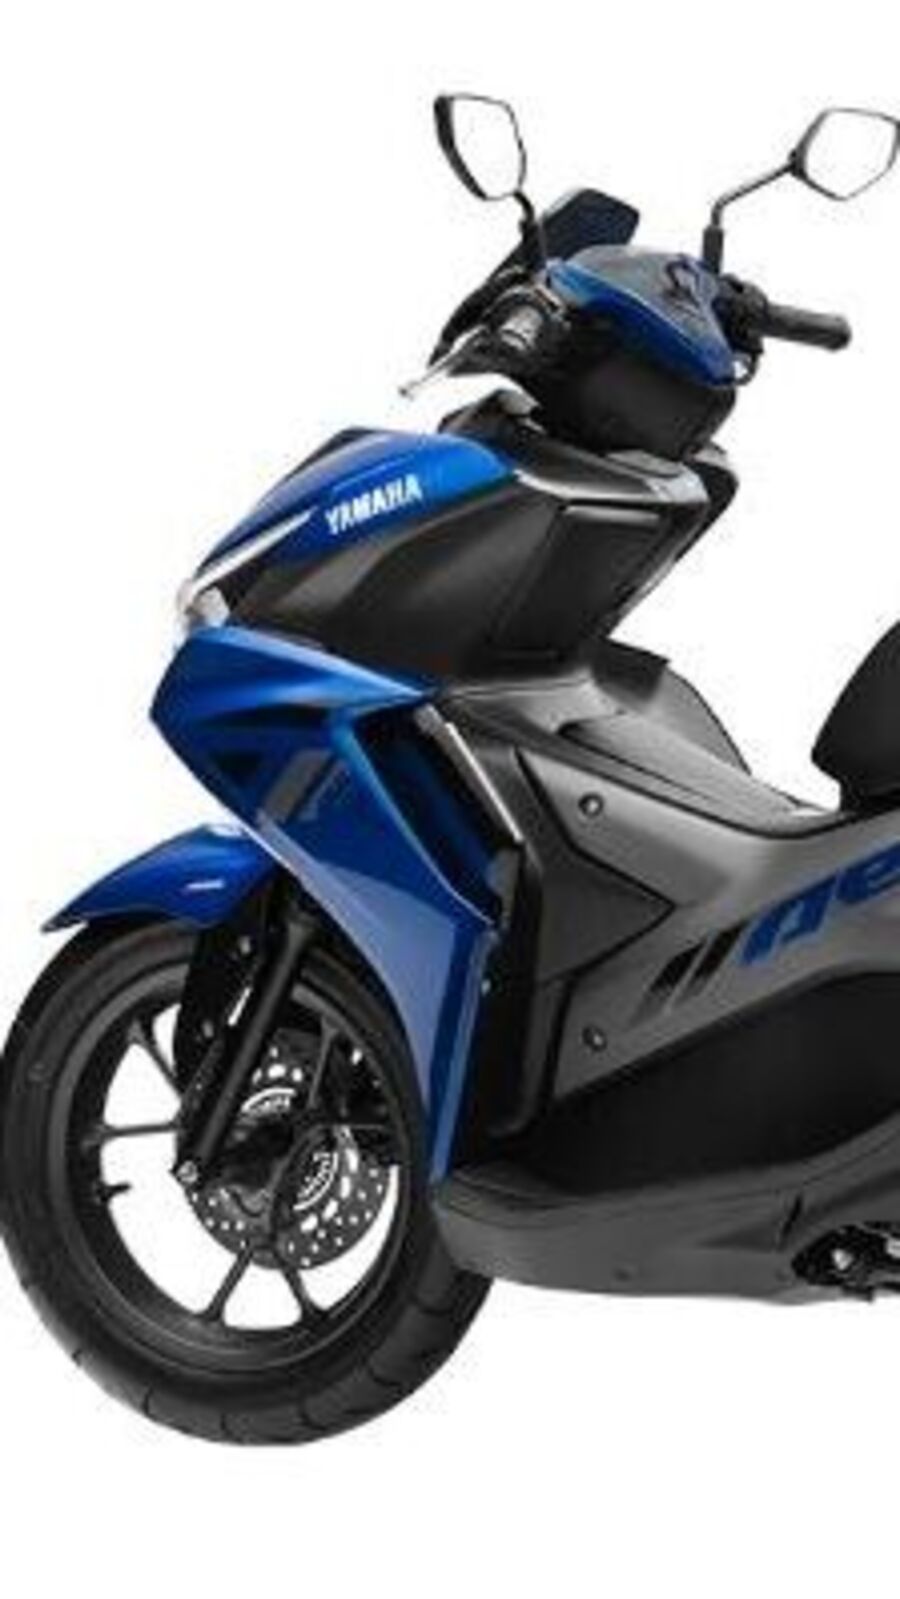 Yamaha's Aerox 155 Sporty Scooter Gets Traction Control